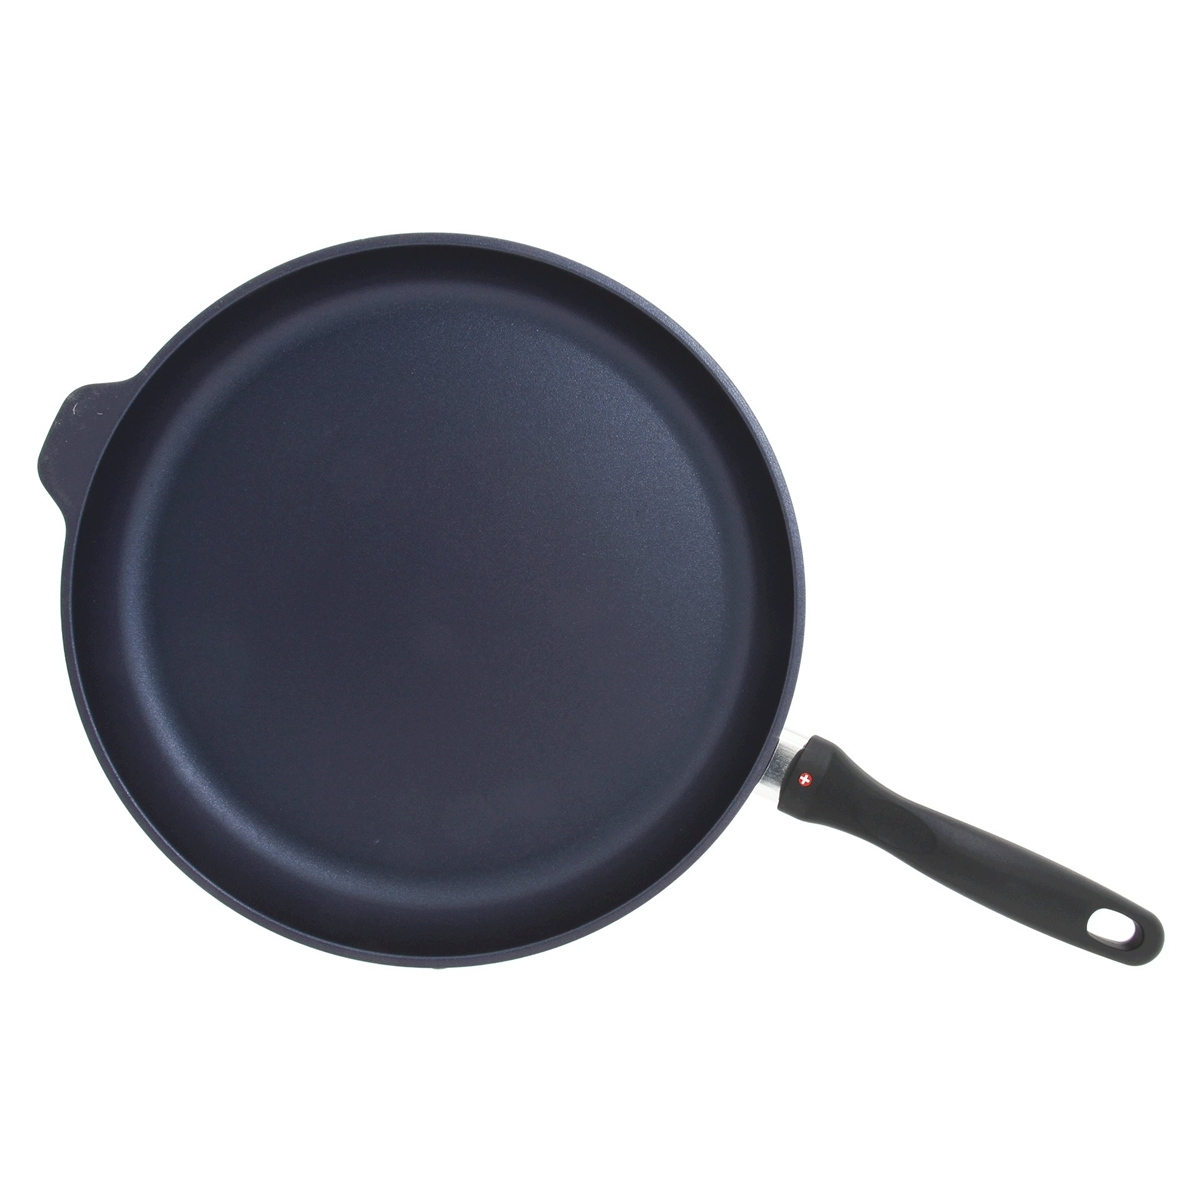 cooking pan clipart - photo #11